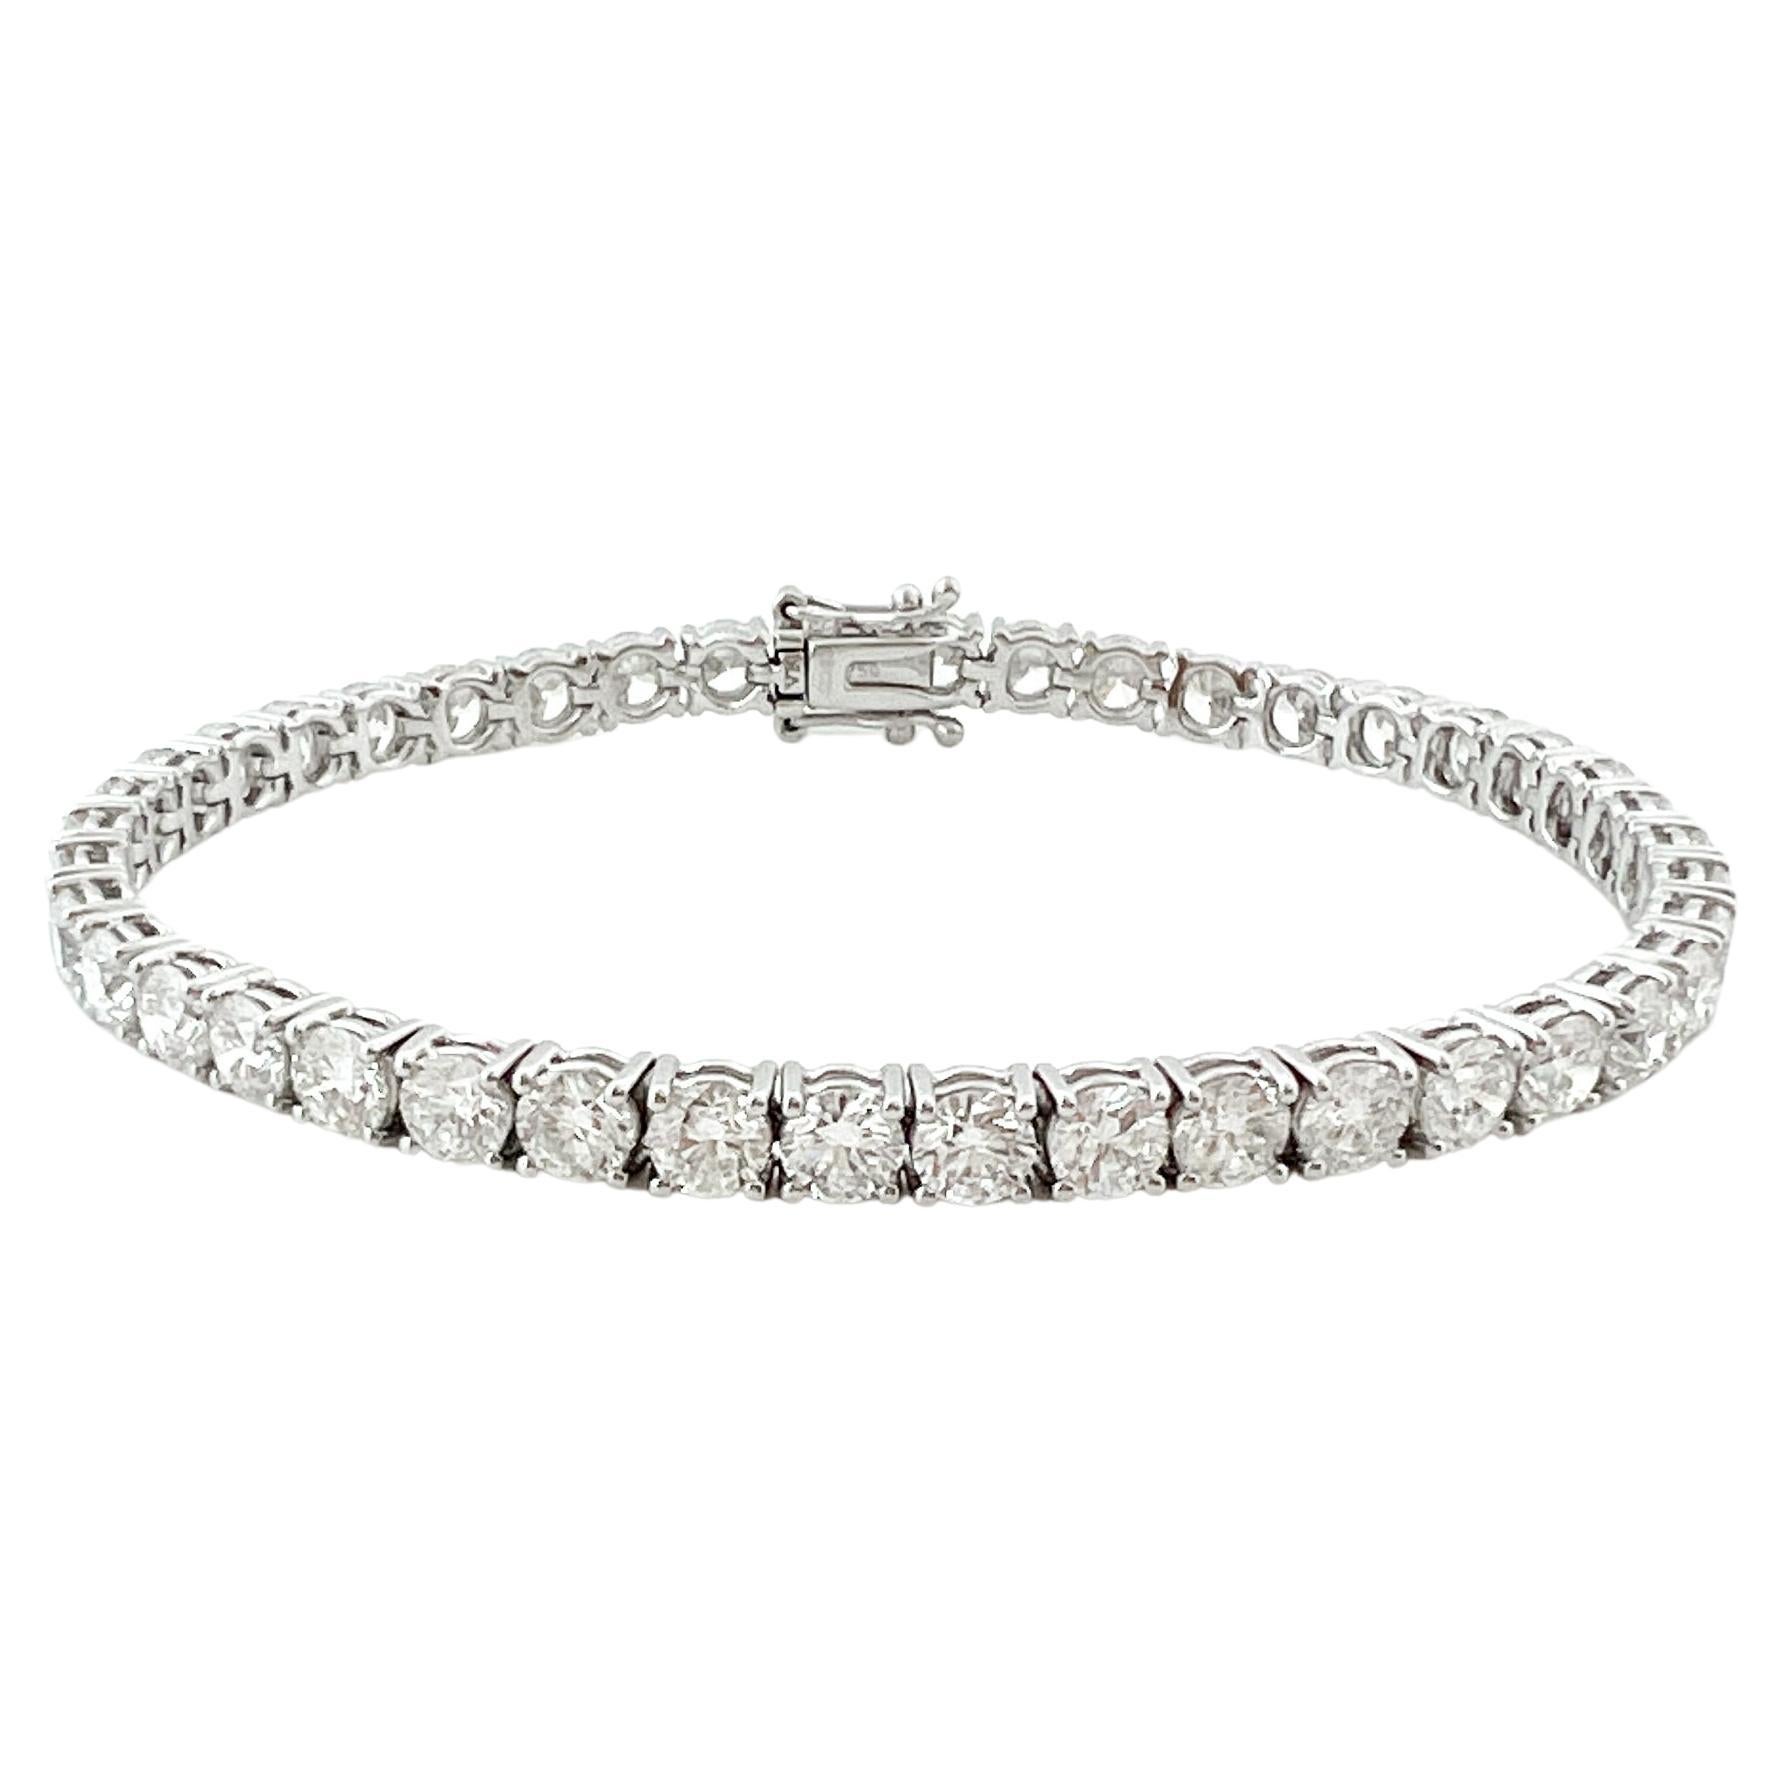 Classic Tennis Bracelet. 
Each Diamond is 25 points, 3.95-4mm in size.
Super bright E/F/G colour and stunning VS clarity.

Minimum total carat weight 10.00ct.
Bracelet length is 6.5 inches , if you require a different length please contact us for an